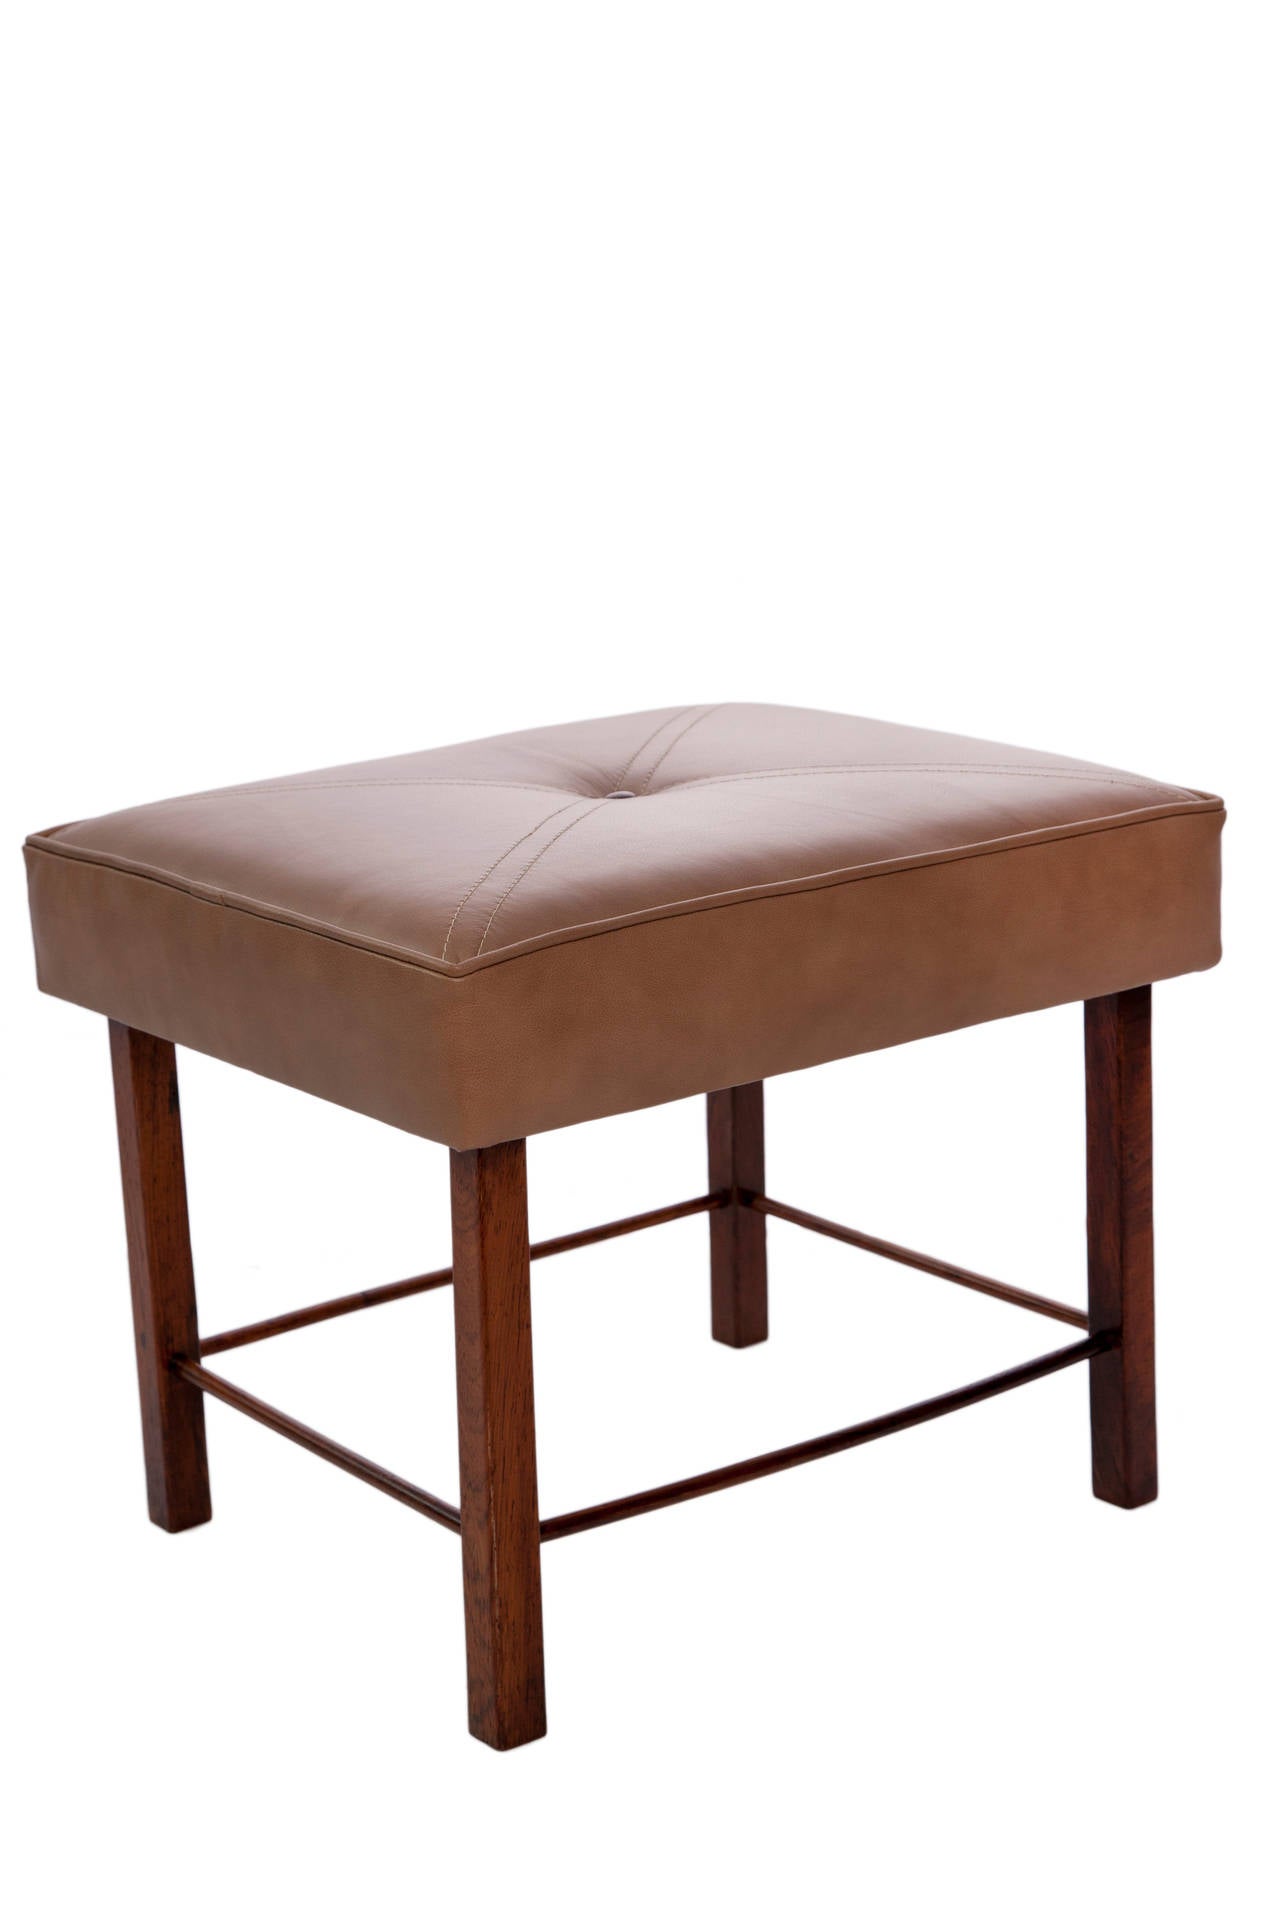 A vintage stool, produced circa 1960s, seat upholstered in tufted beige leather, with single wood button and crossed stitching accents, over a jacaranda wood frame, legs and four cylindrical beam stretchers. Good vintage condition, with age